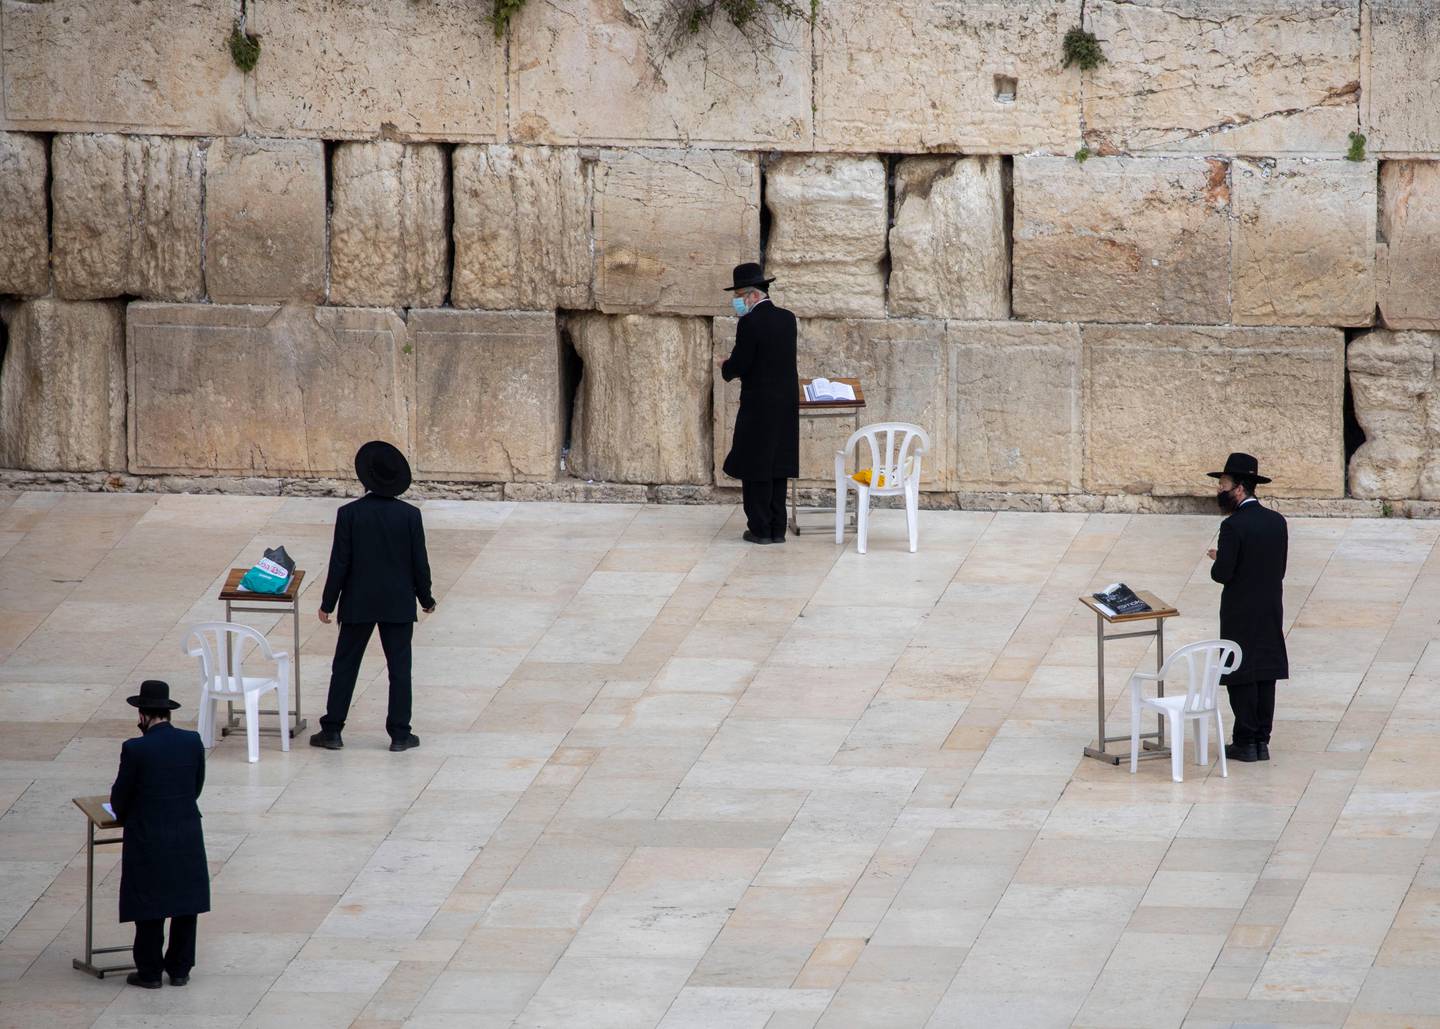 In this Tuesday, April 7, 2020 photo, ultra-Orthodox Jewish men wear face masks and keep social distancing, following the government's measures to help stop the spread of the coronavirus, pray at the Western Wall, the holiest site where Jews can pray in Jerusalem's Old City . As a modern pandemic afflicts the globe, Israeli Jews are being forced to scale back or cancel beloved traditions and rituals marking the start of Passover, the holiday celebrating Israelites' freedom from Egyptian bondage and referencing biblical plagues. Communal preparations have been canceled. Police are enforcing stay-at-home orders and a general lockdown on intercity travel through Friday morning. (AP Photo/Ariel Schalit)